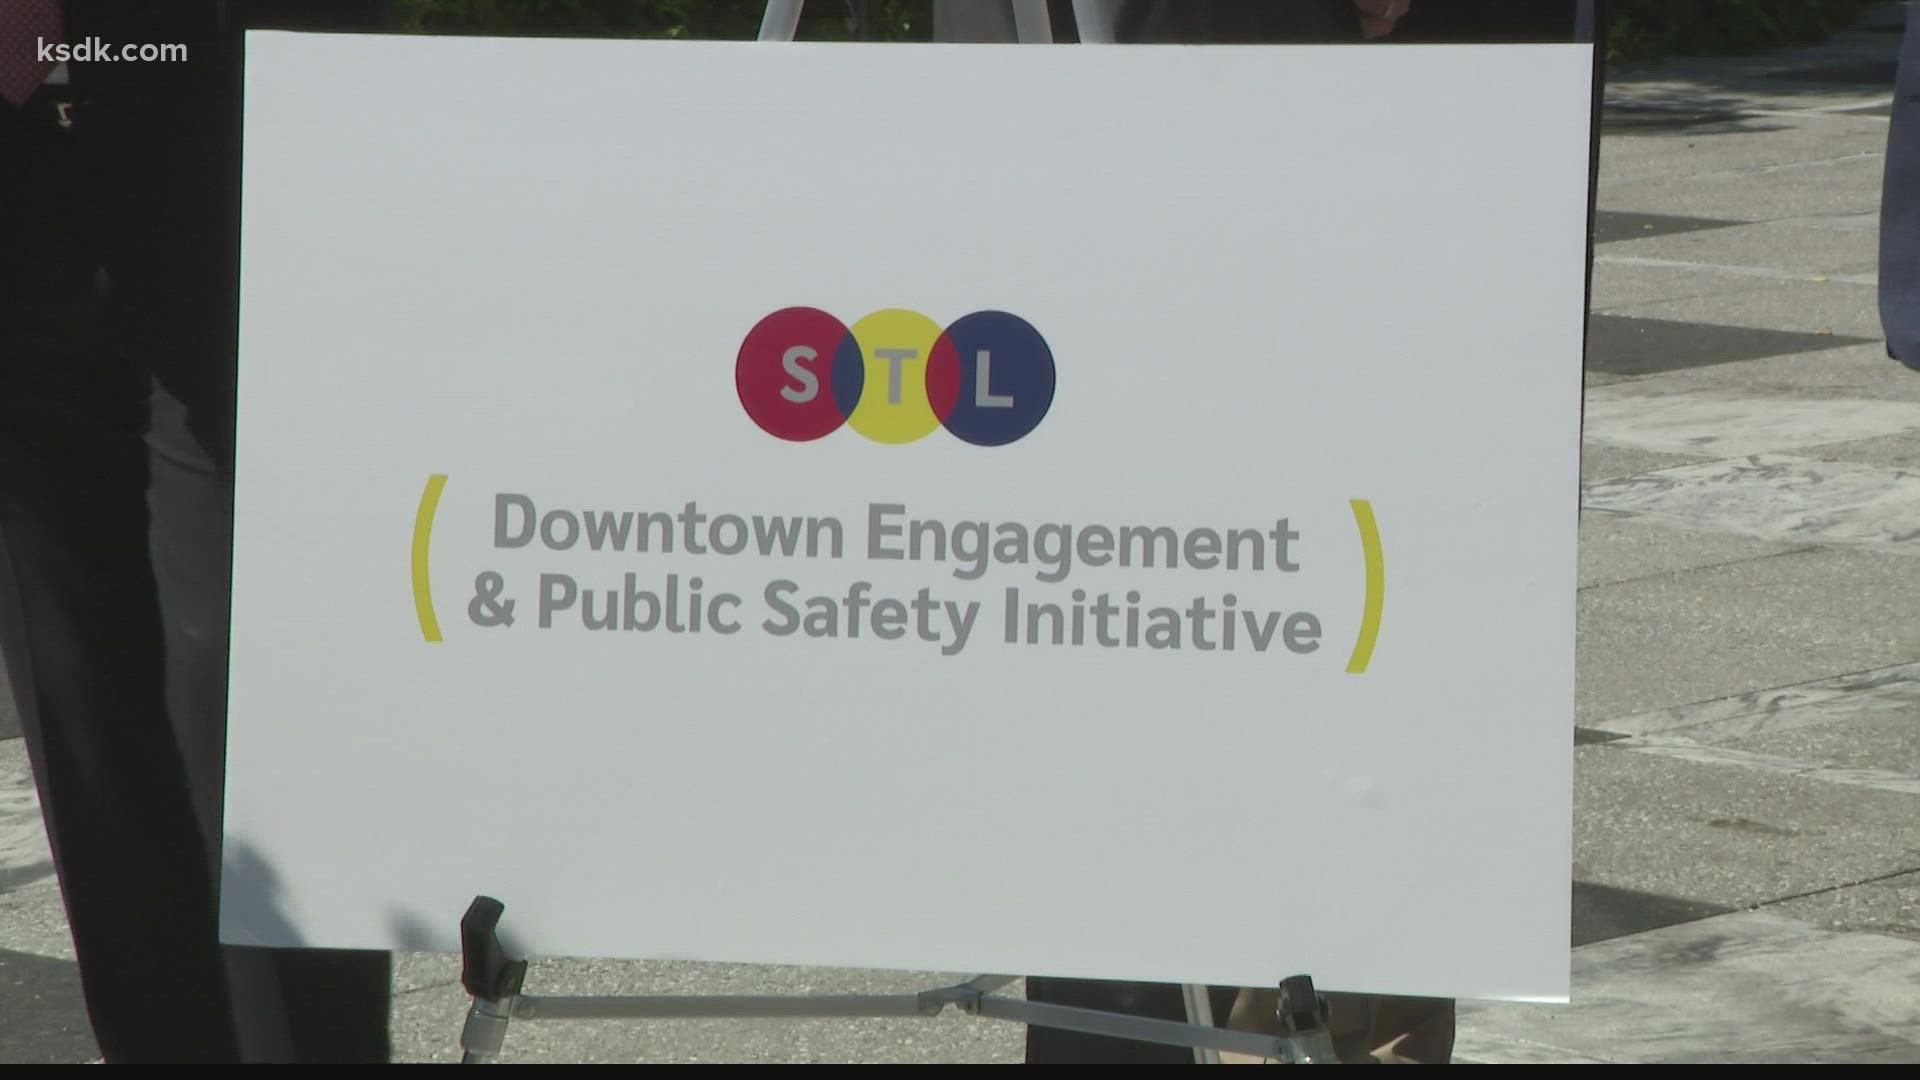 "When it comes to downtown safety failure is not an option,” Bill Dewitt III said. “We have to fix this."